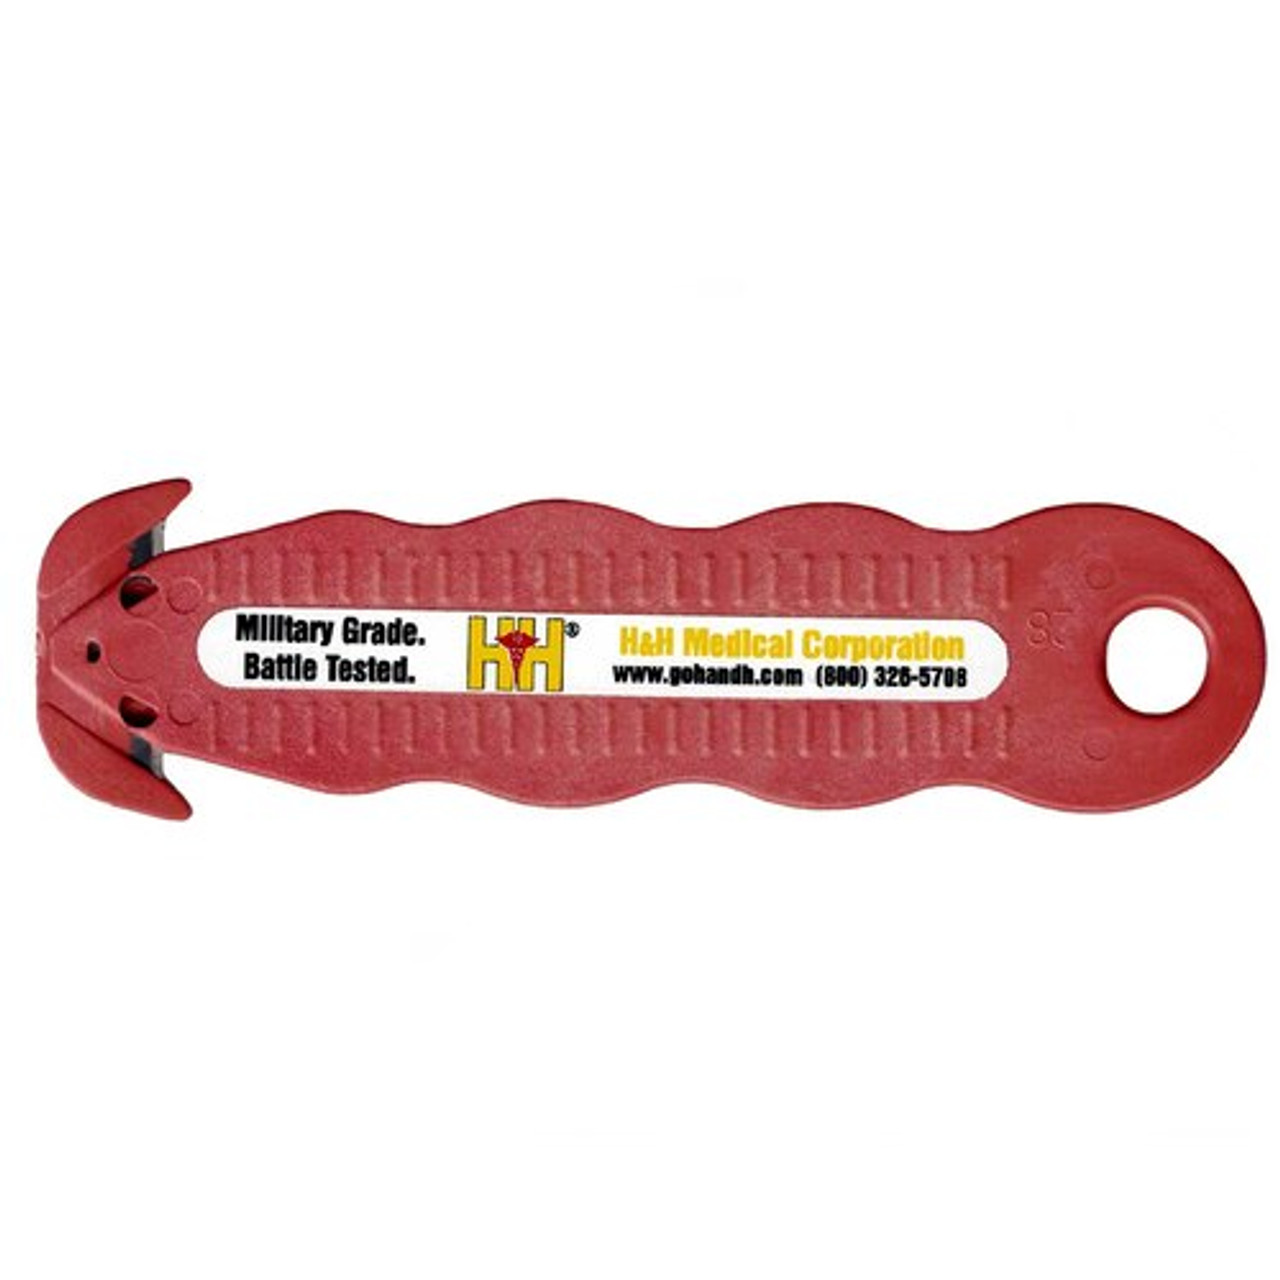 Klever Kutter, Klever Safety Cutters in Stock - ULINE